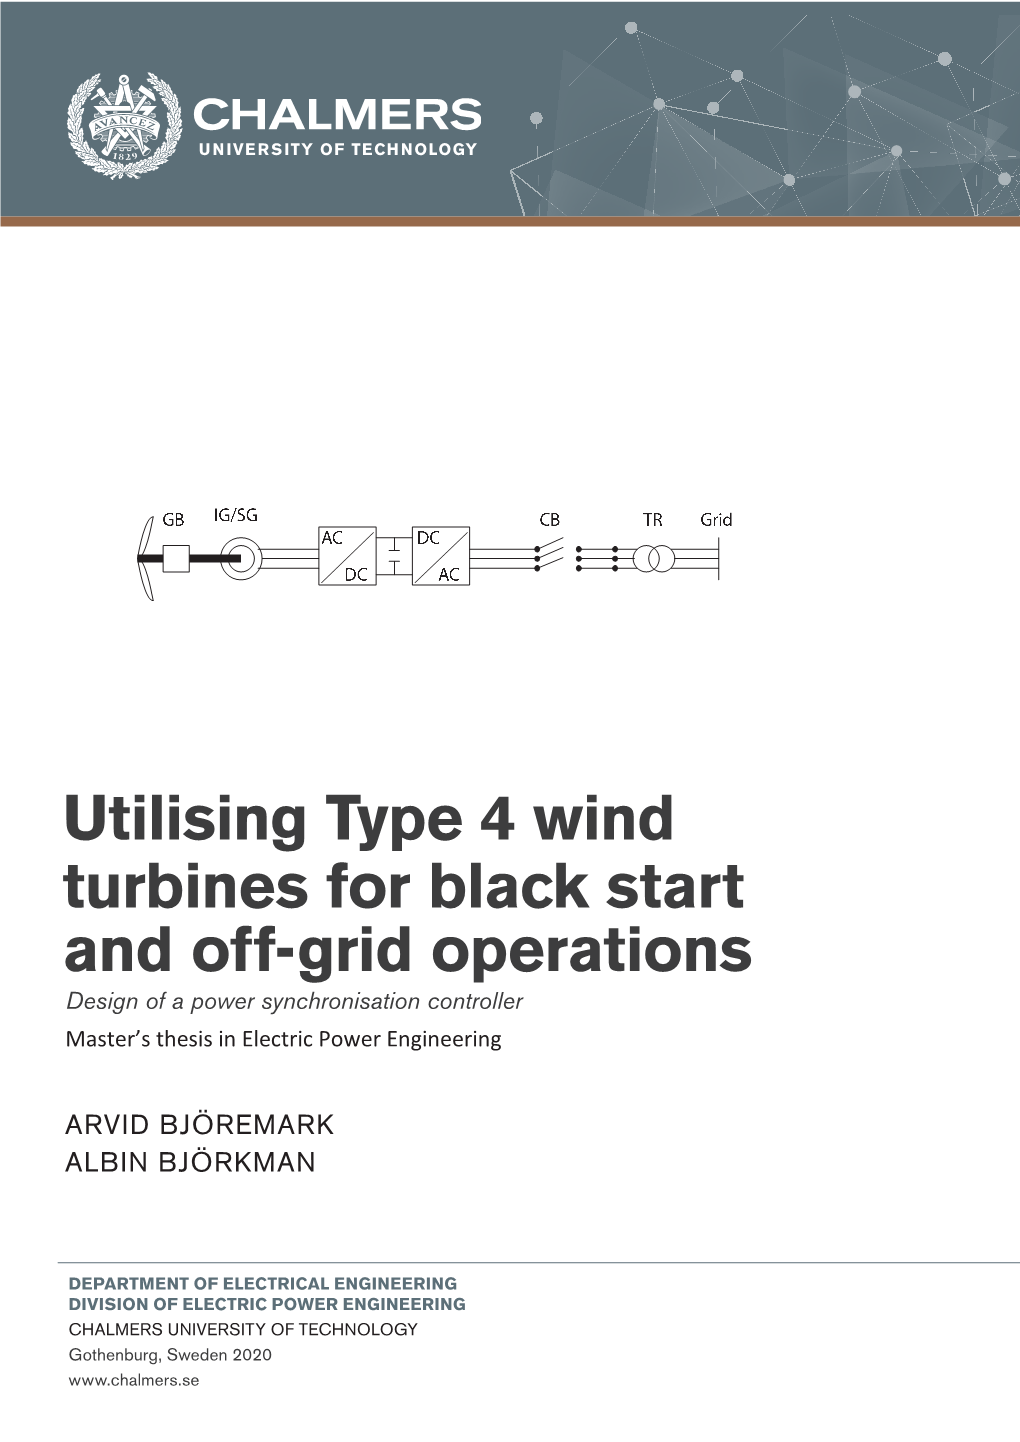 Utilising Type 4 Wind Turbines for Black Start and Off-Grid Operations 2020